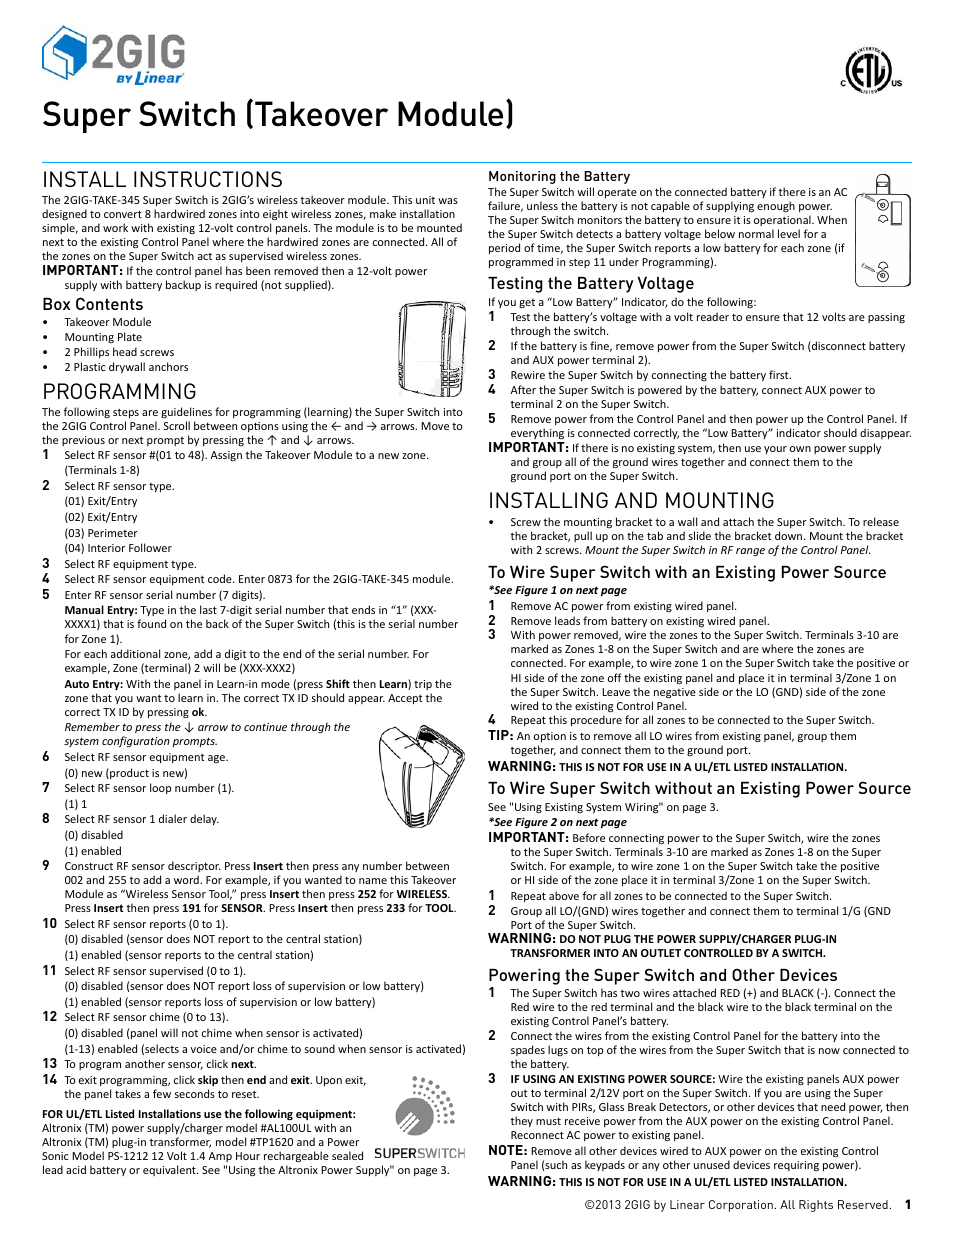 2GIG TAKE-345 Super Switch User Manual | 4 pages